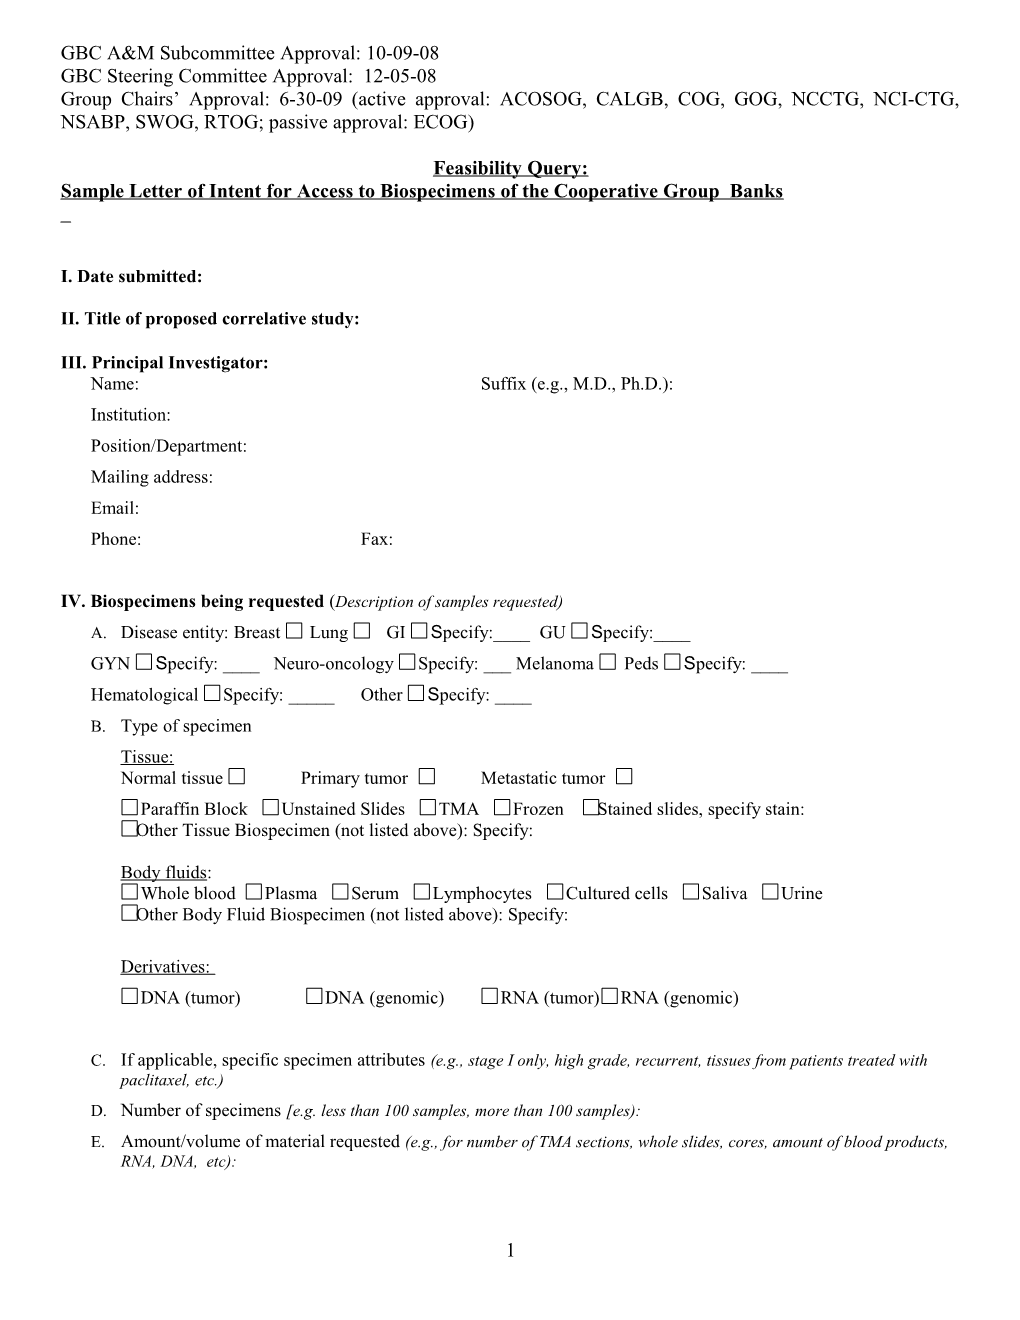 Sample Letter of Intent for Access to Biospecimens of the Cooperative Group Bank